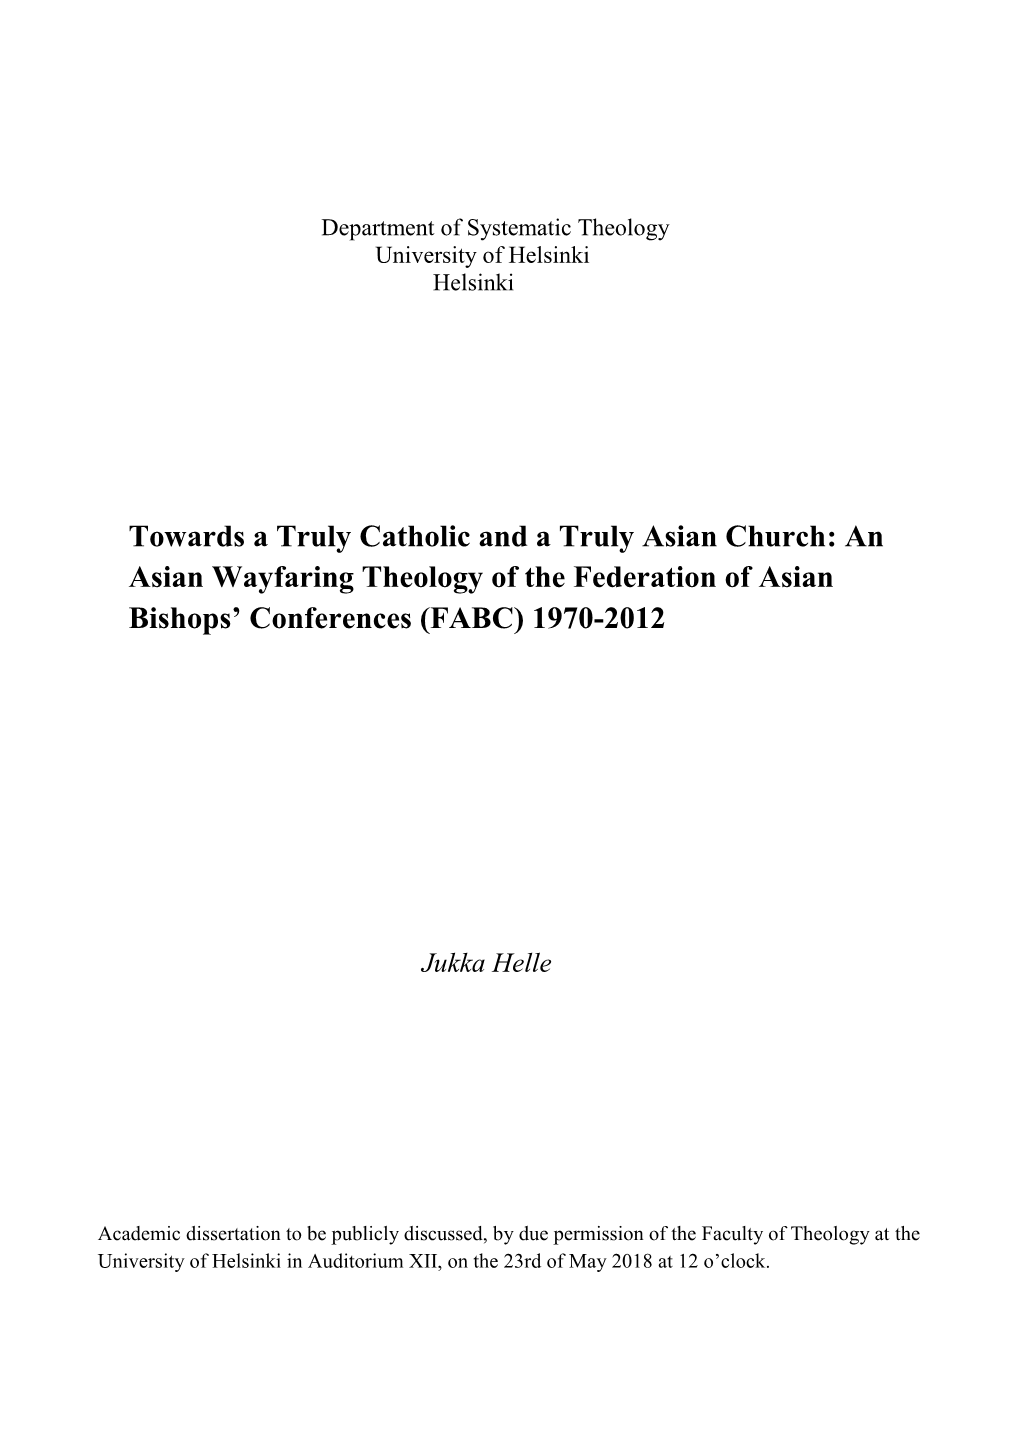 Towards a Truly Catholic and a Truly Asian Church: an Asian Wayfaring Theology of the Federation of Asian Bishops’ Conferences (FABC) 1970-2012